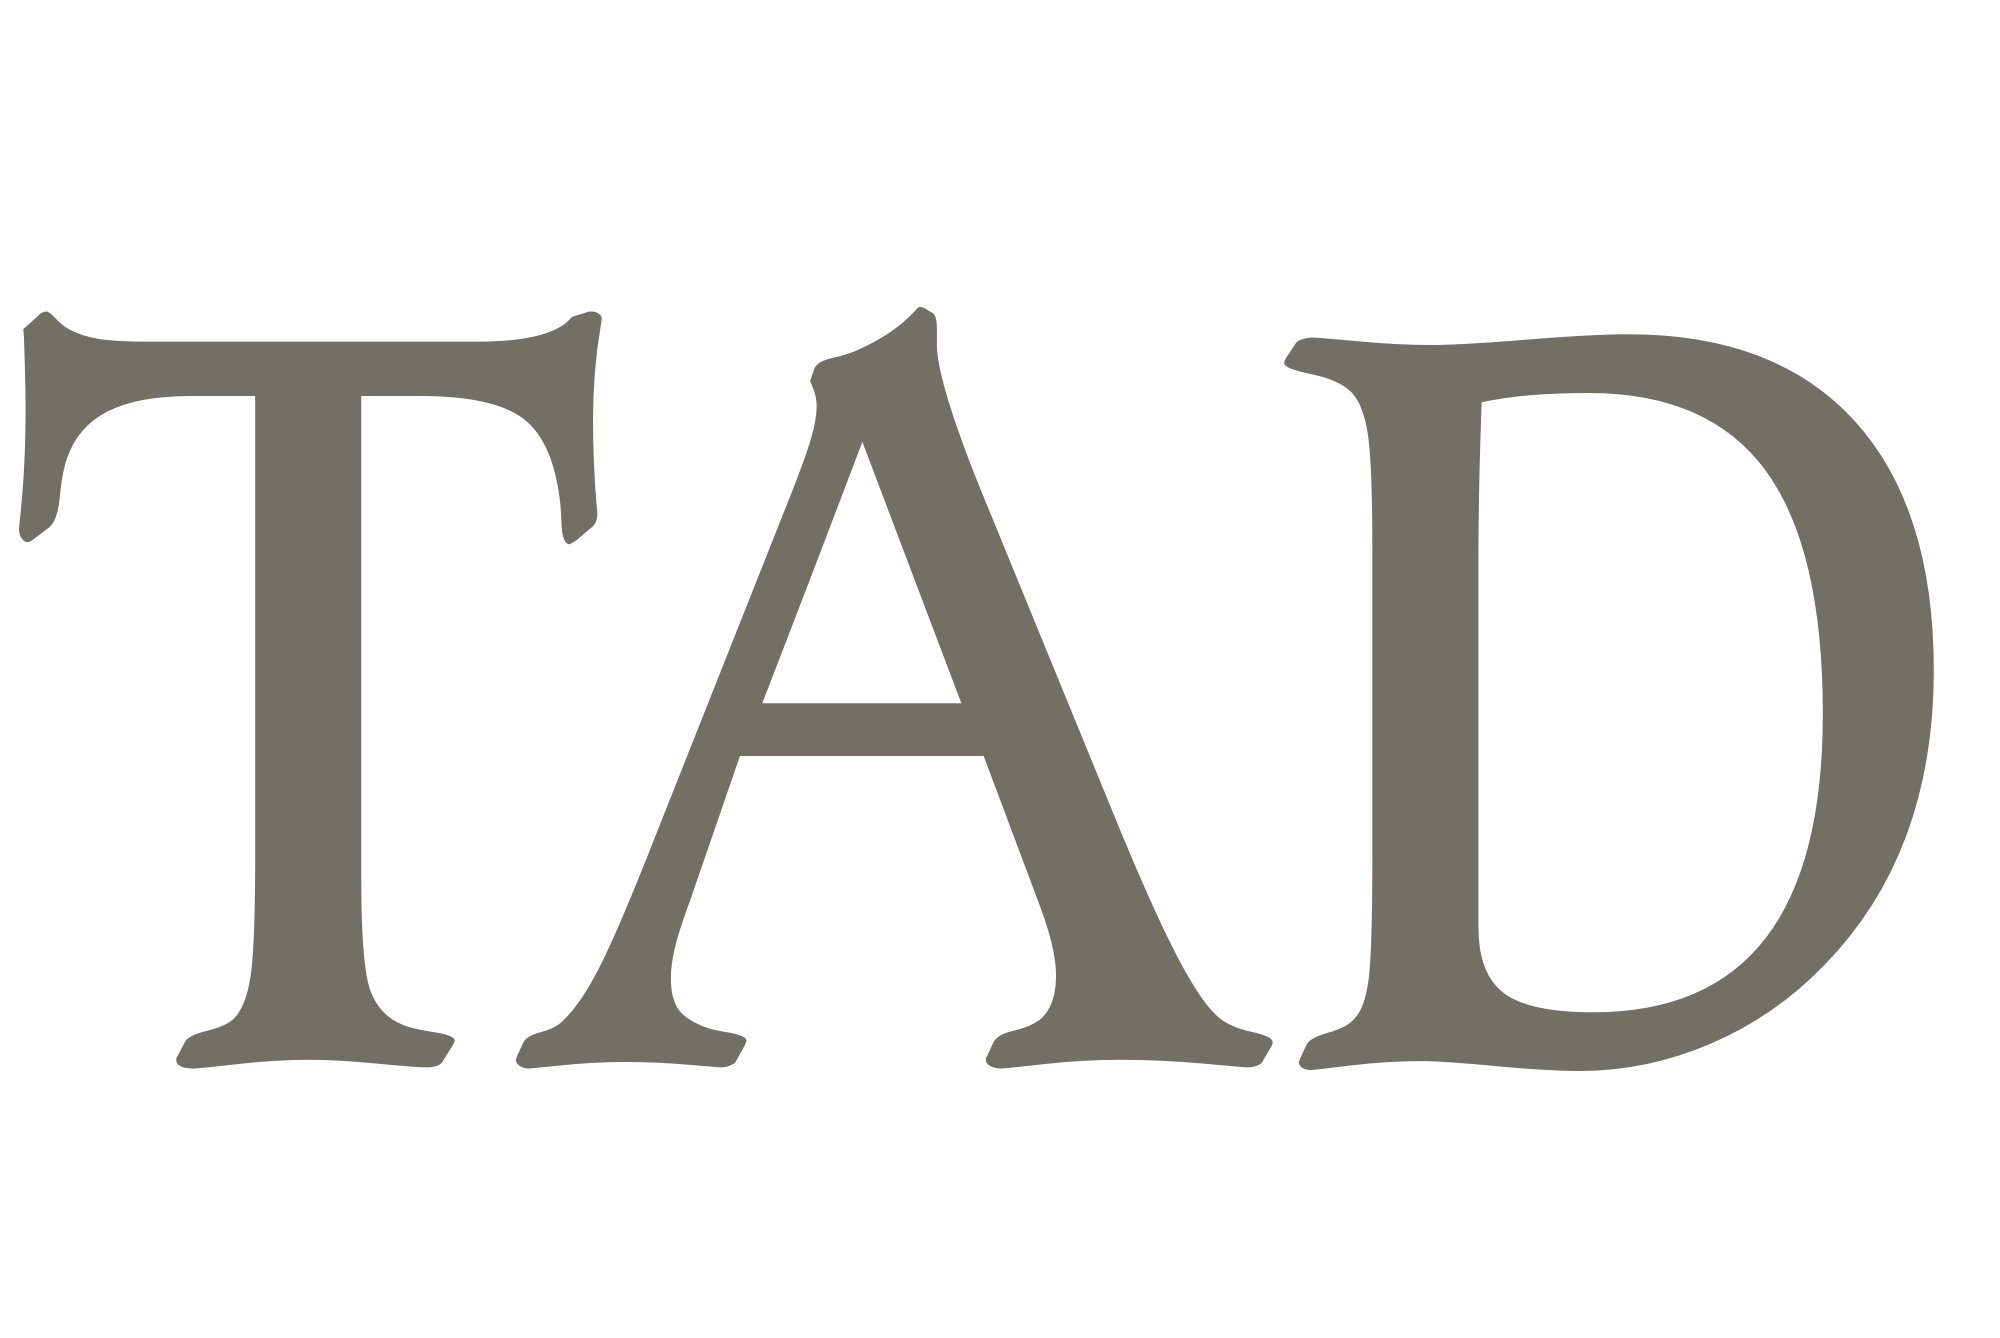 Tad Name Logo - Tad's Meaning of Tad